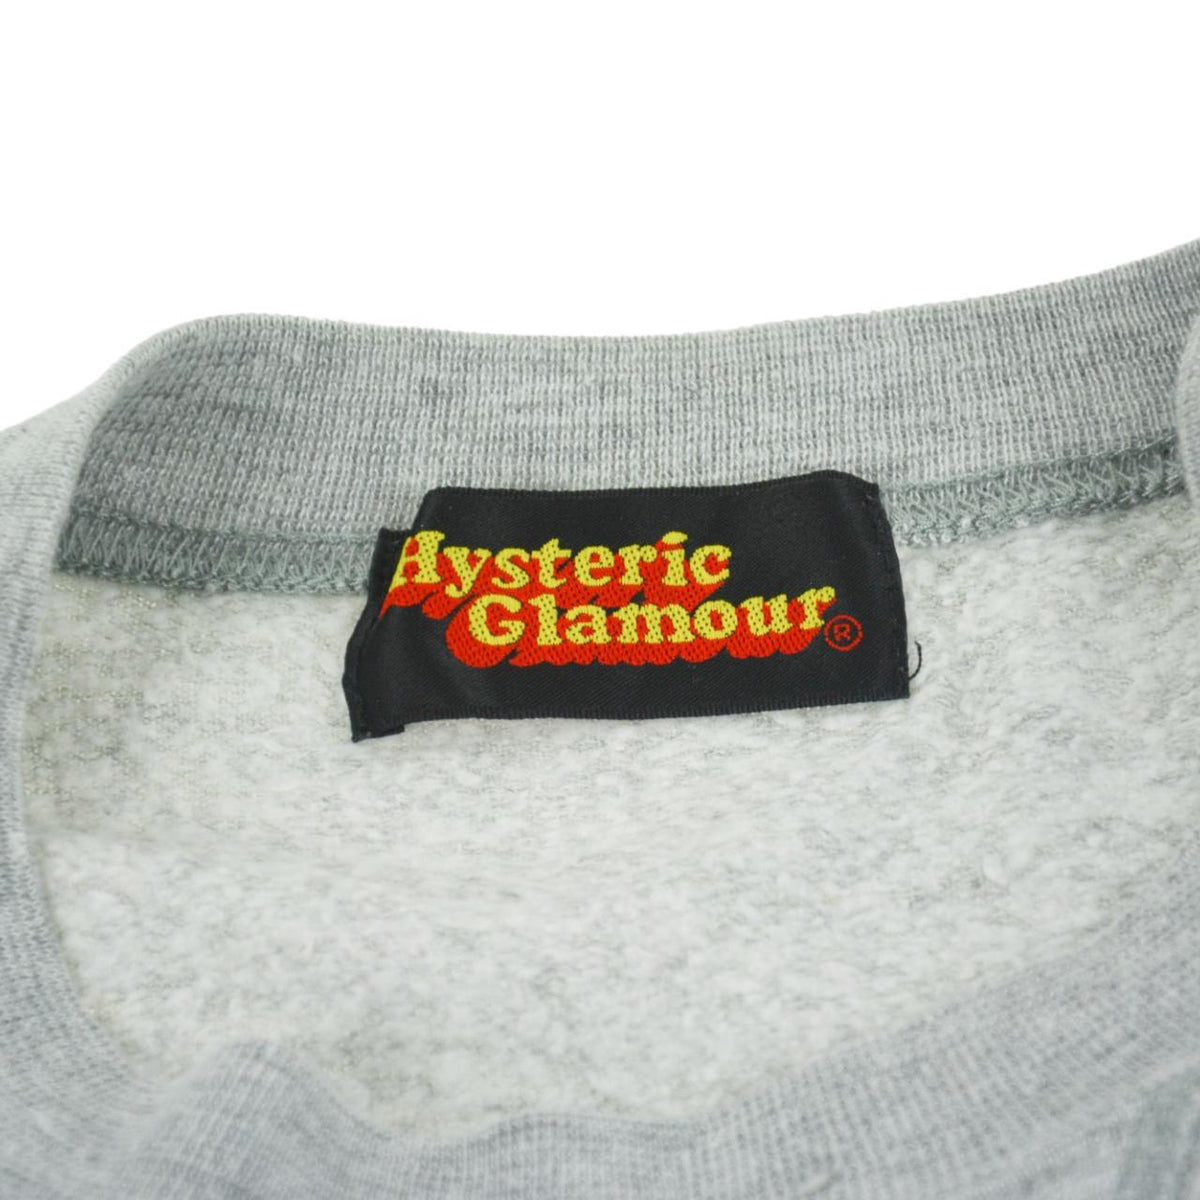 Vintage Hysteric Glamour Puppet Show Sweatshirt Woman’s Size S